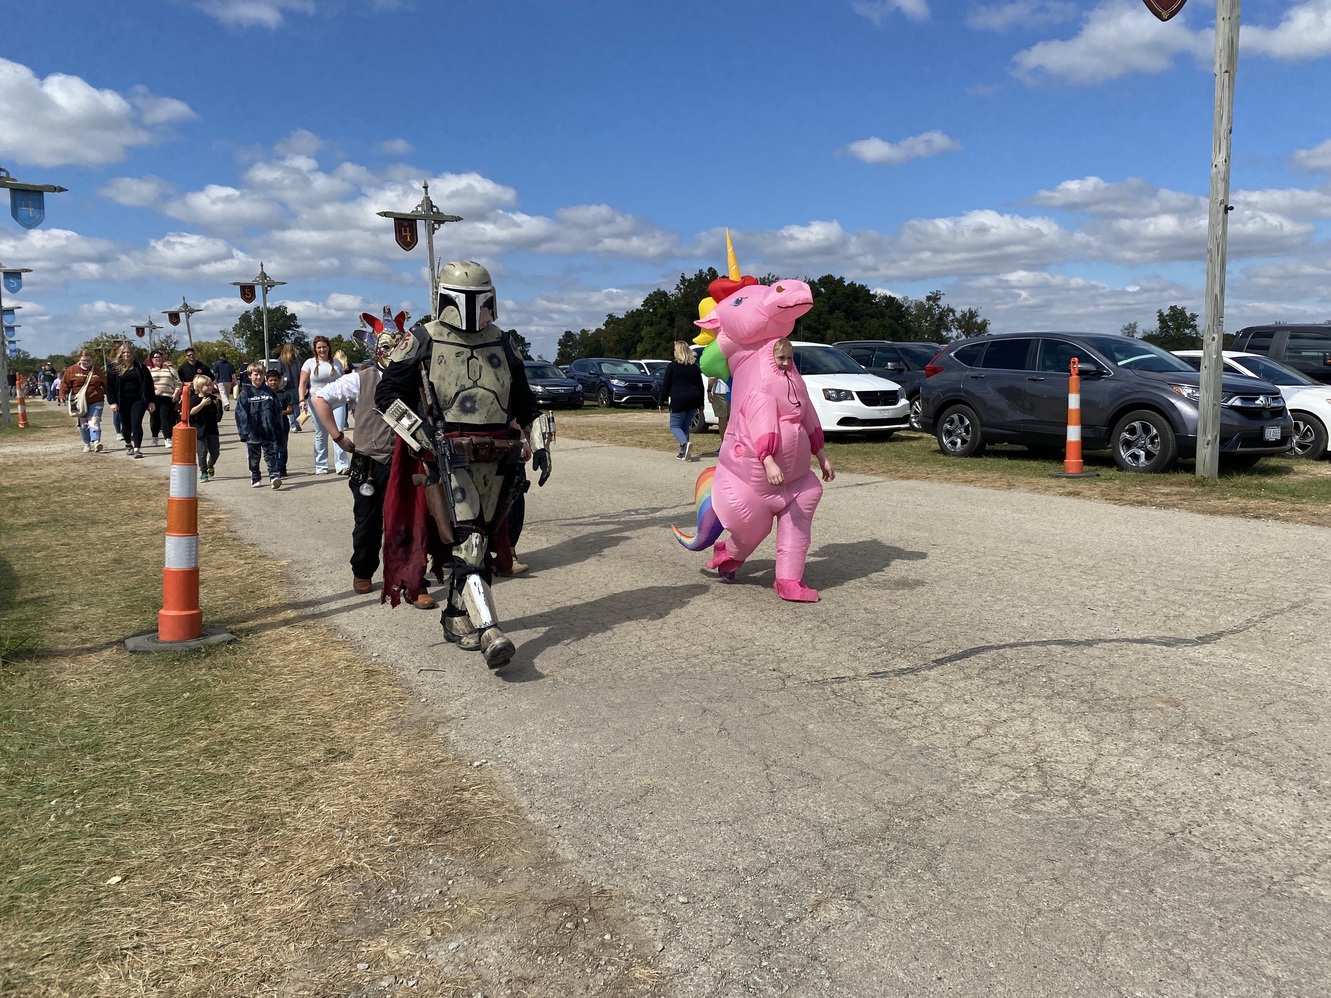 Boba Fett and a pink dinosaur come into the festival
        together.